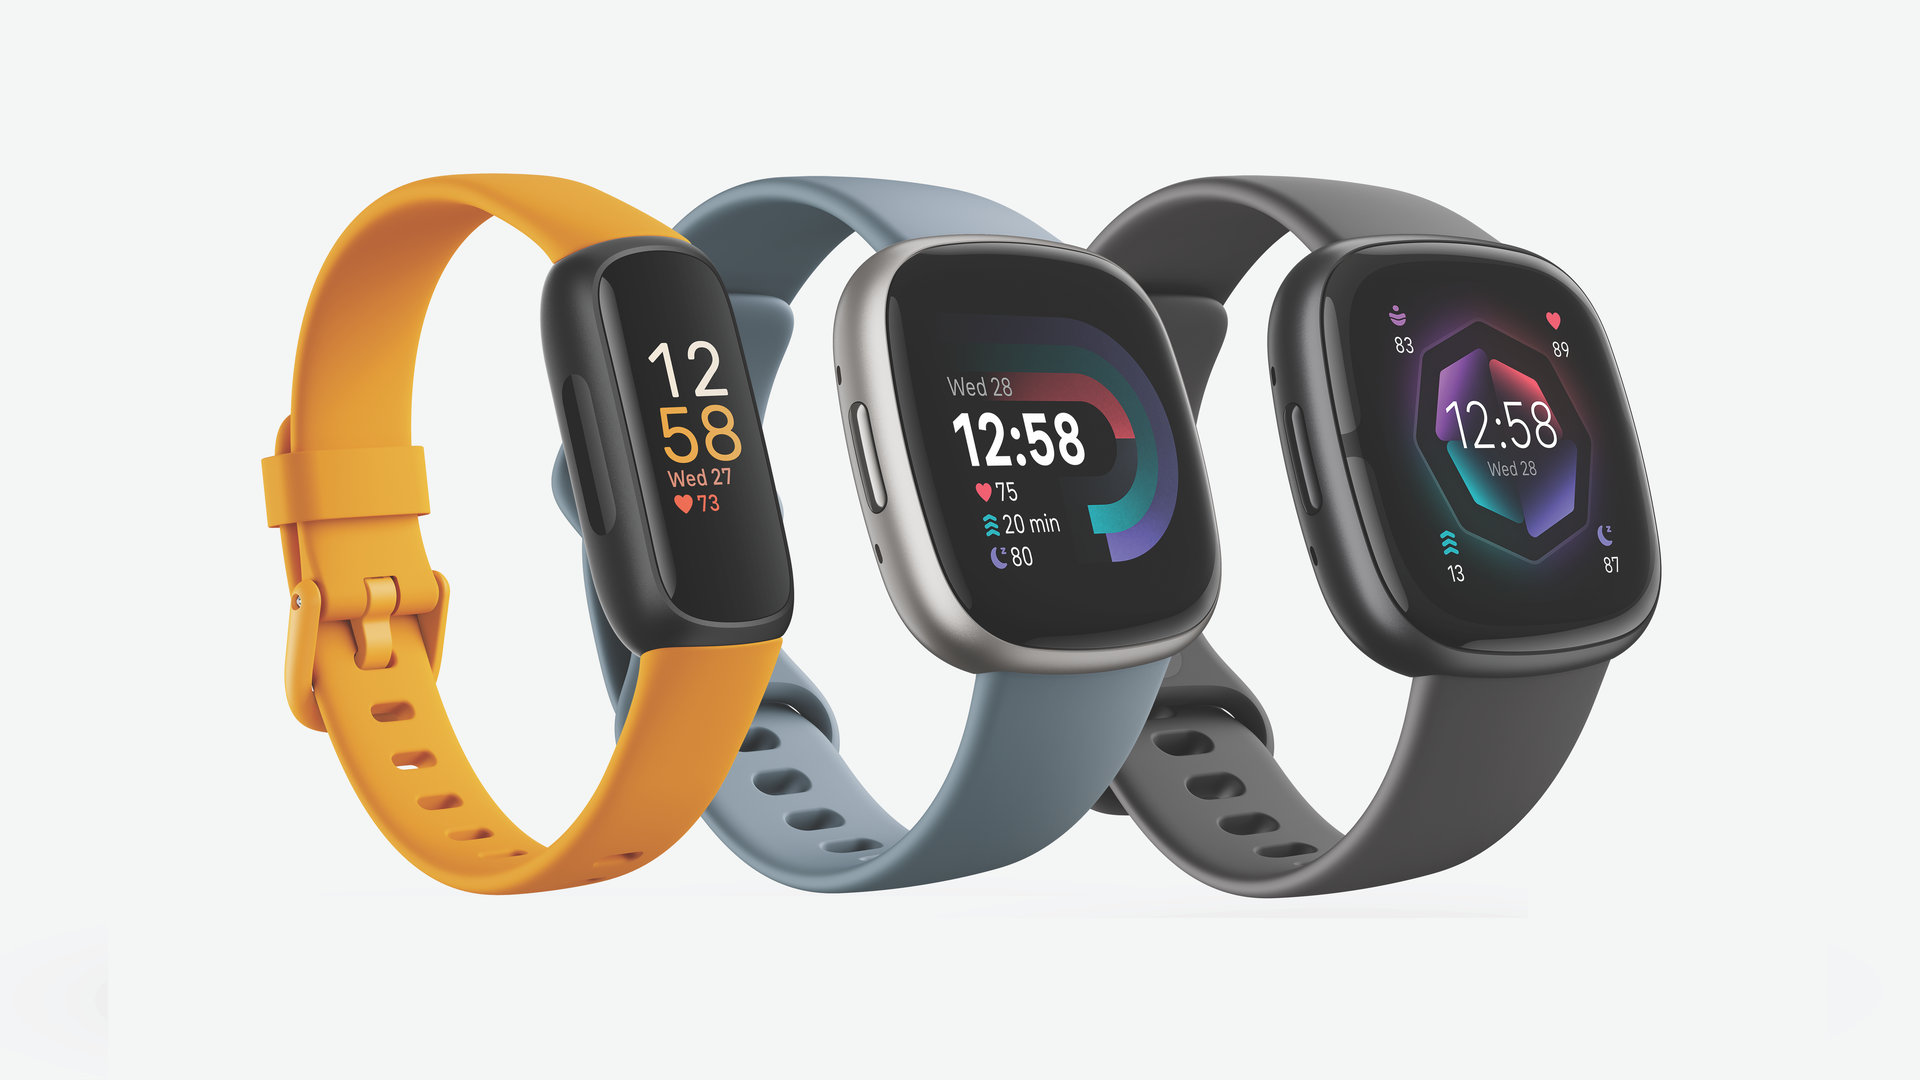 Google's fall 2022 Fitbit lineup: the Inspire 3, Versa 4 and Sense 2